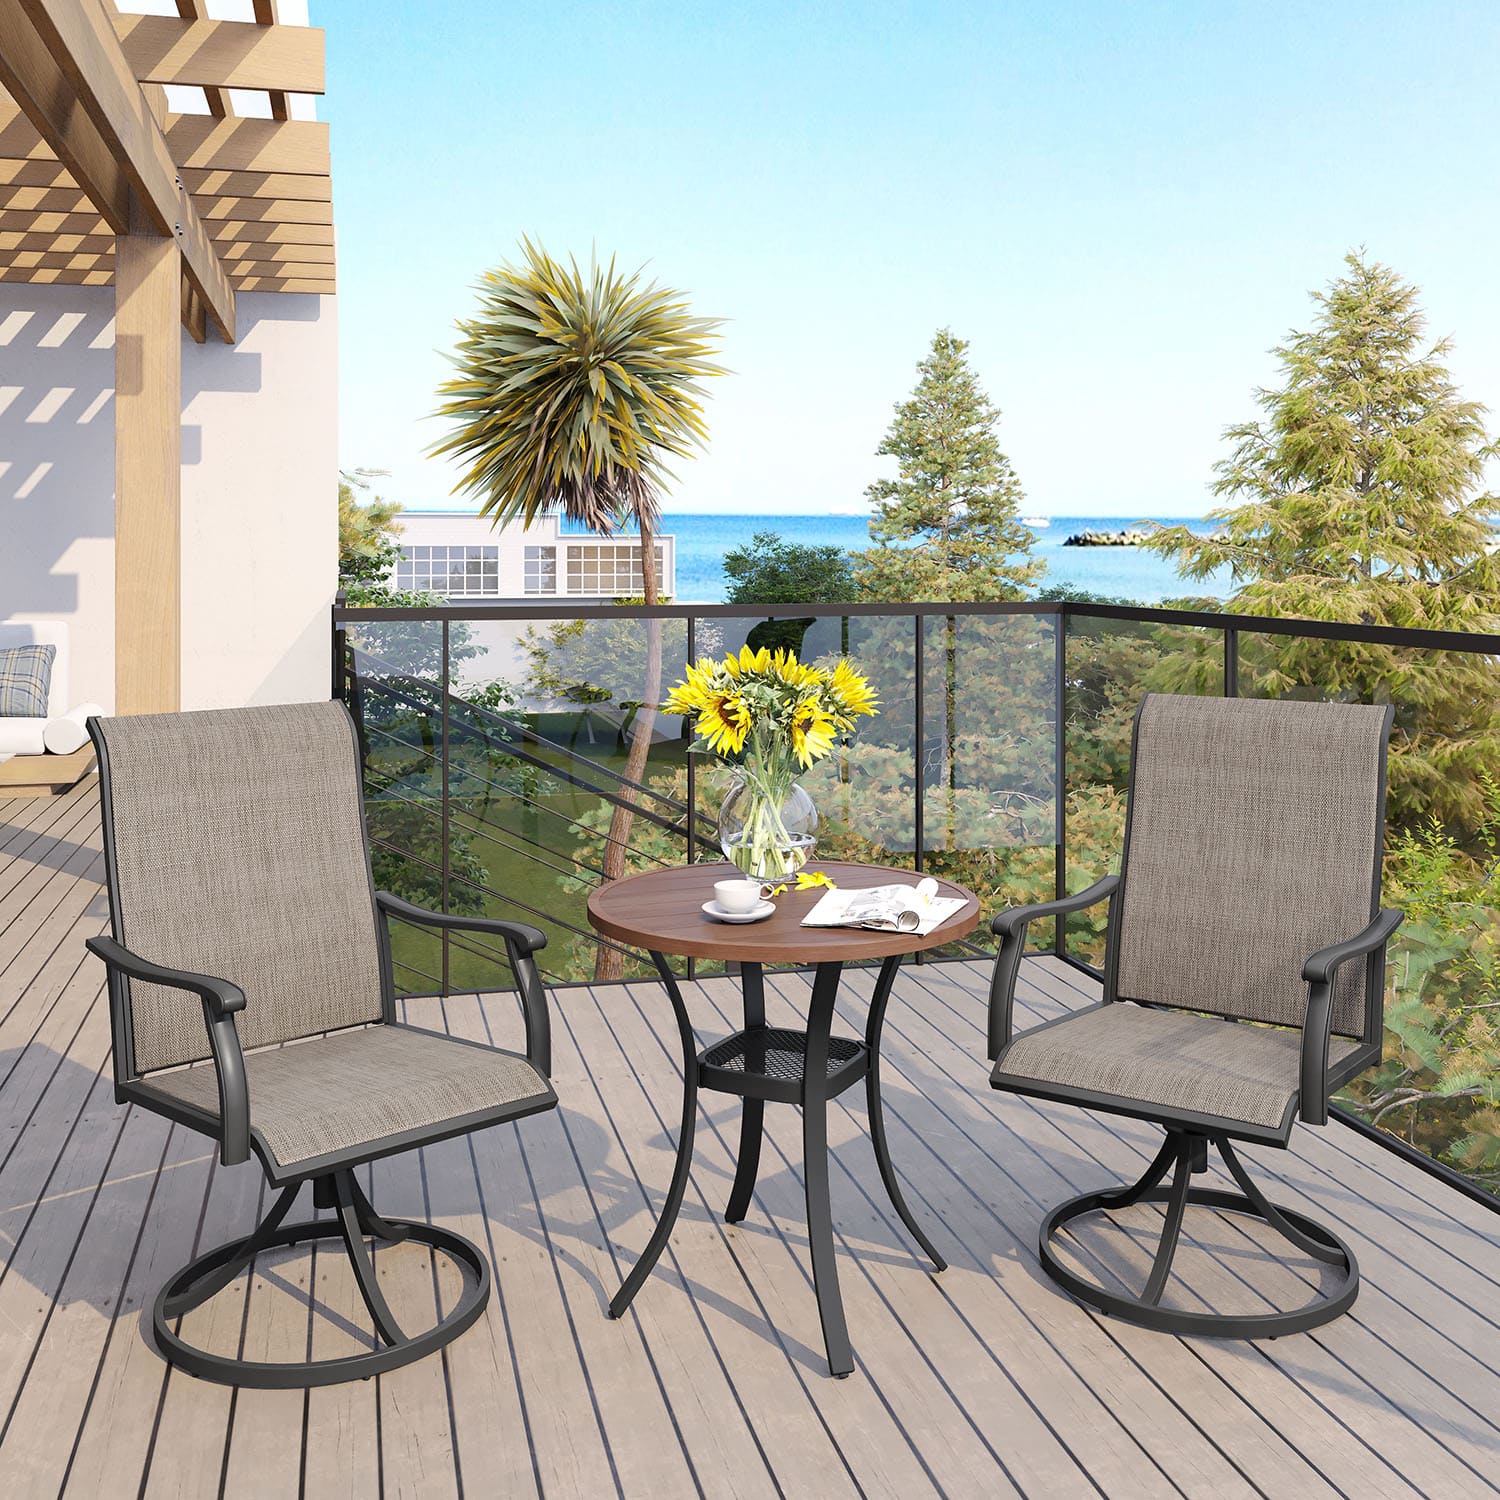 Vicllax 3-Piece Patio Bistro Set, Outdoor Swivel Chairs and Round Bisto Table